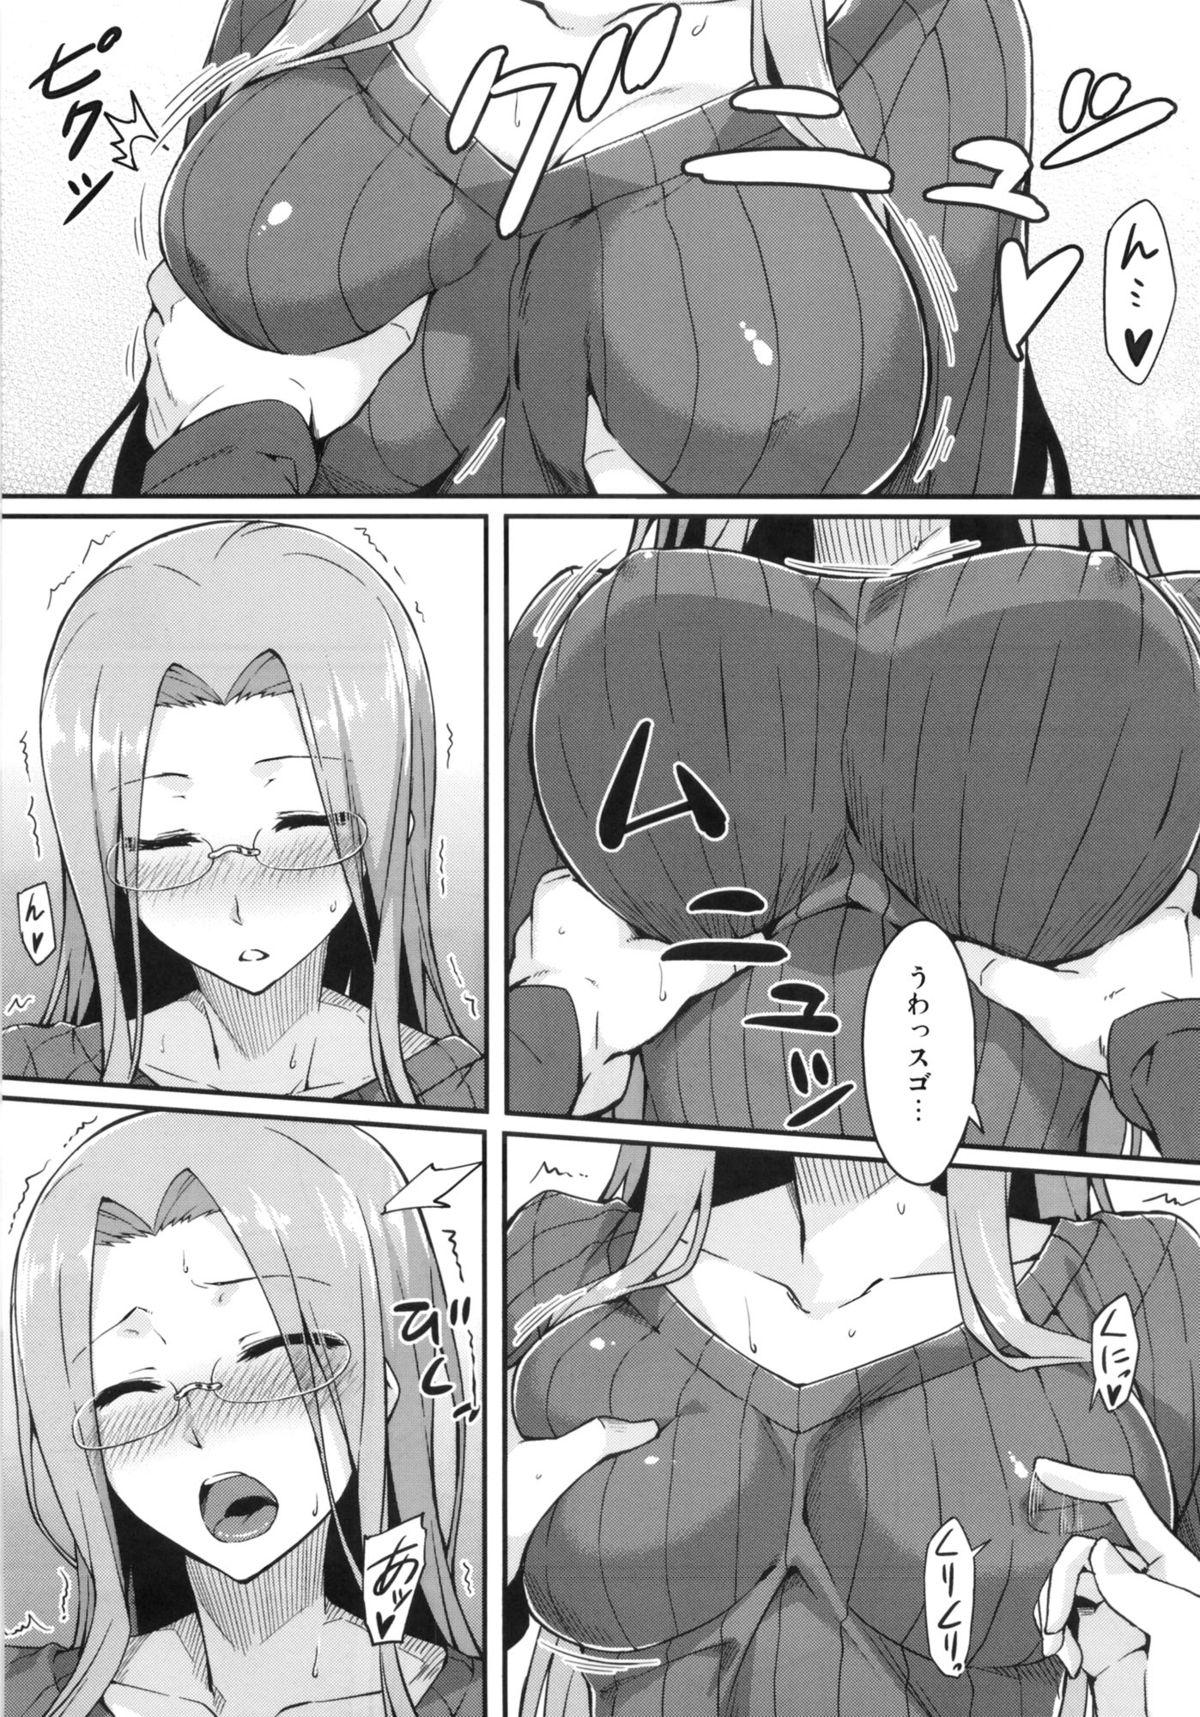 8teen Rider-san to Tate Sweater. - Fate hollow ataraxia Climax - Page 6